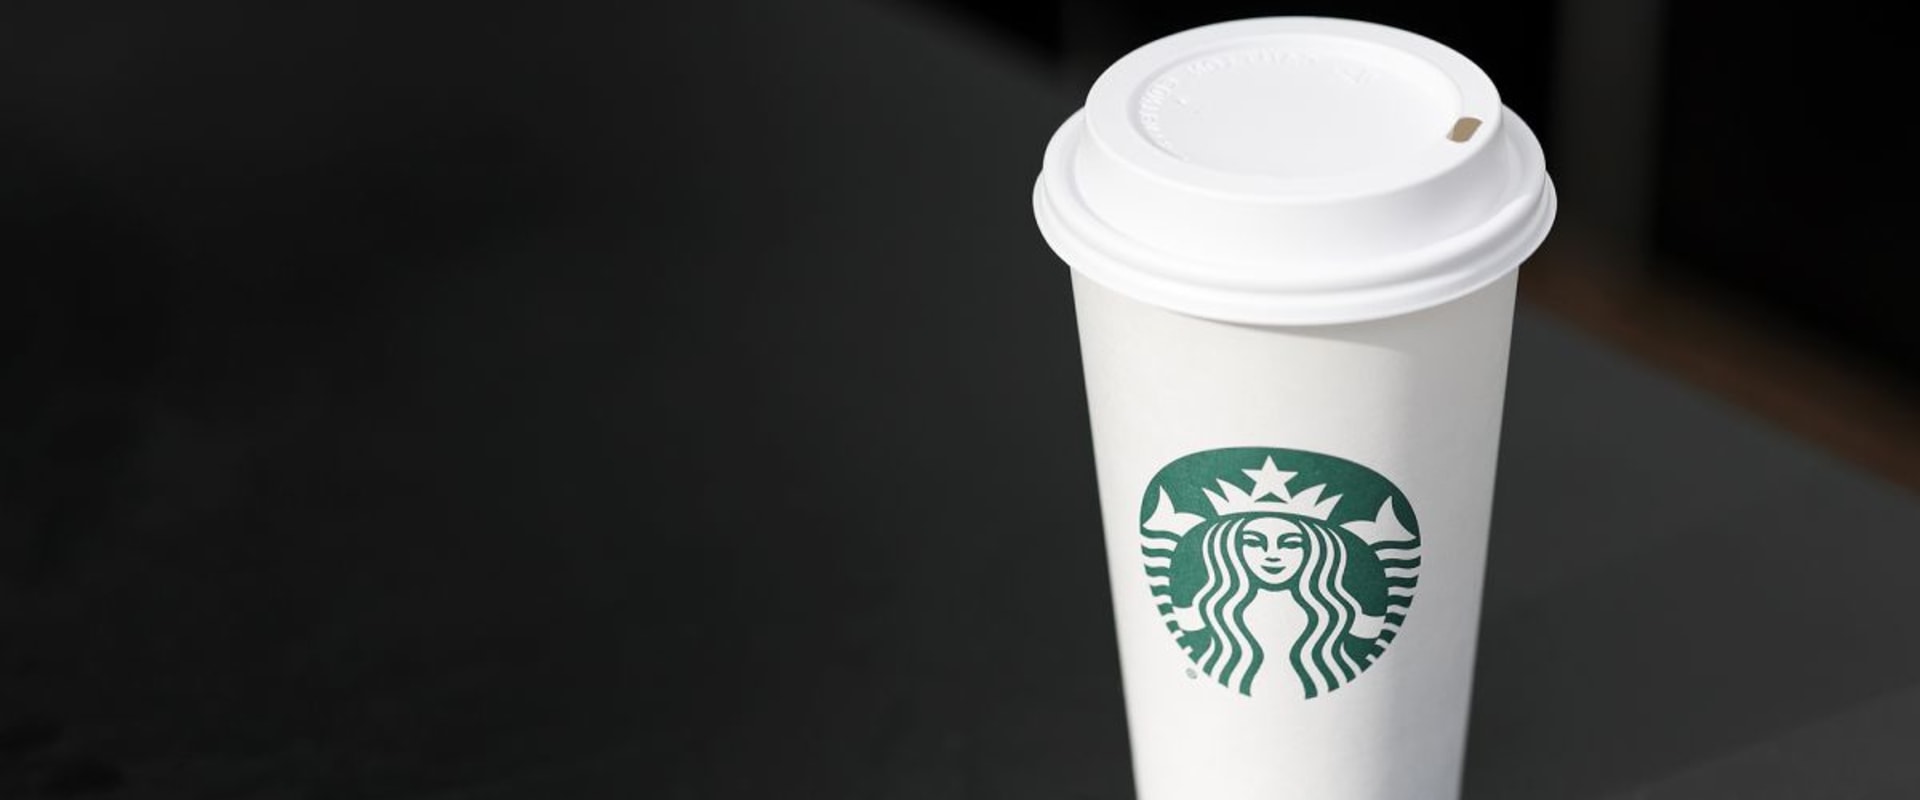 Why is Starbucks Closing So Many Locations?